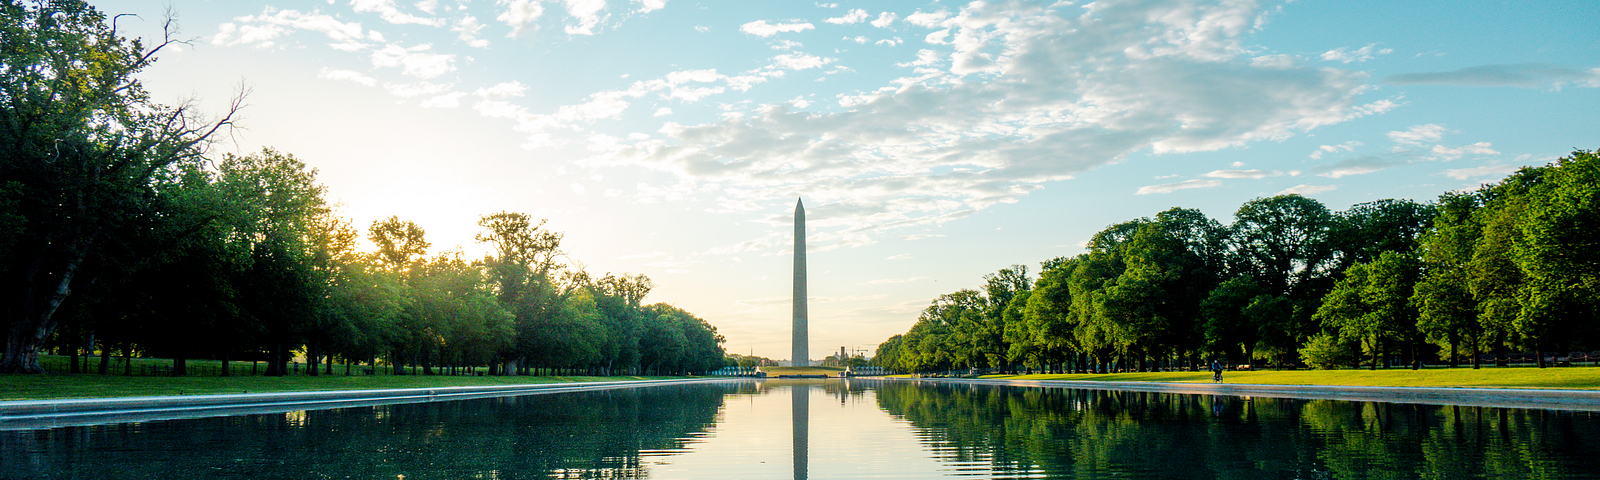 The bright calm  view of the Washington Monument at the end of the Lincoln Memorial reflecting pool on a peaceful day.